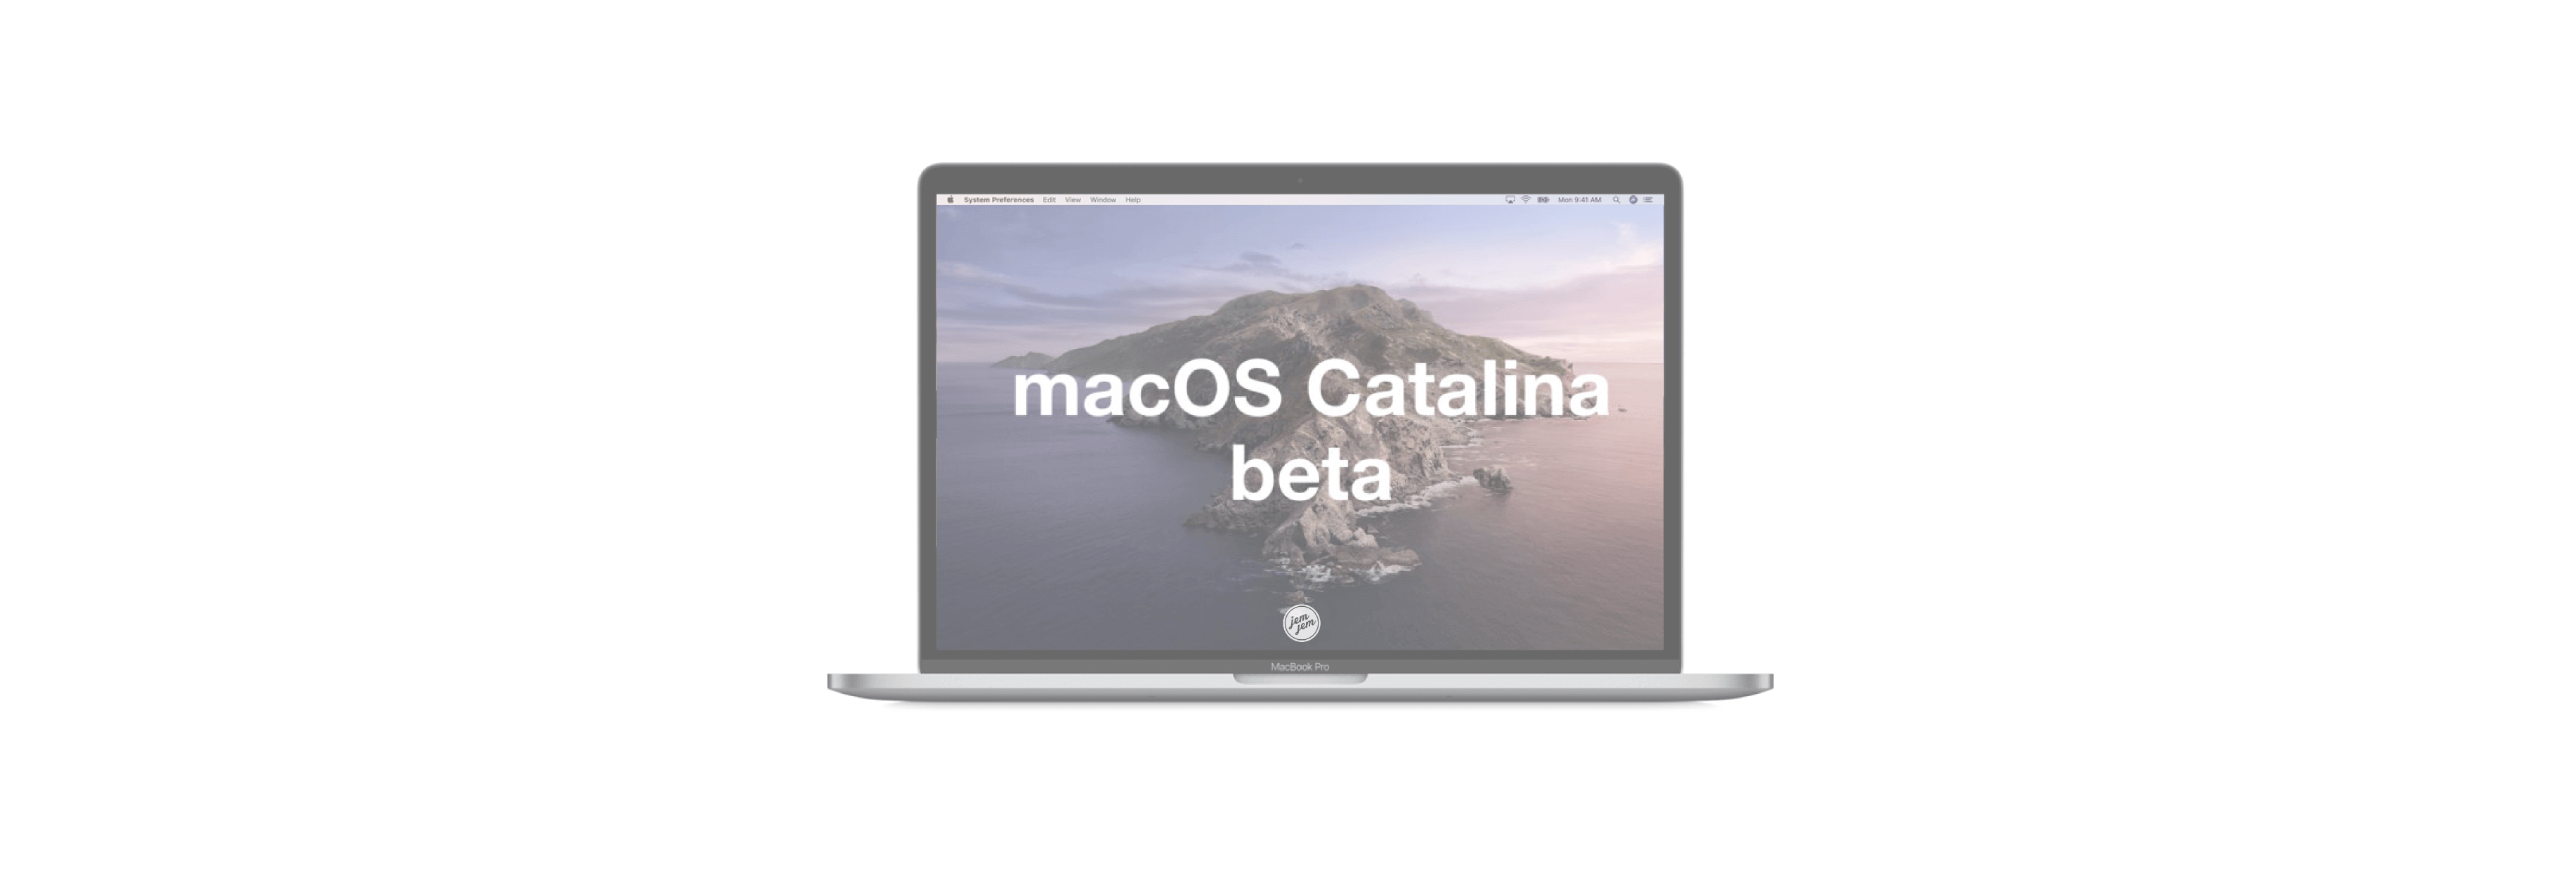 How to download and install macOS Catalina  developer beta 4 to your Mac